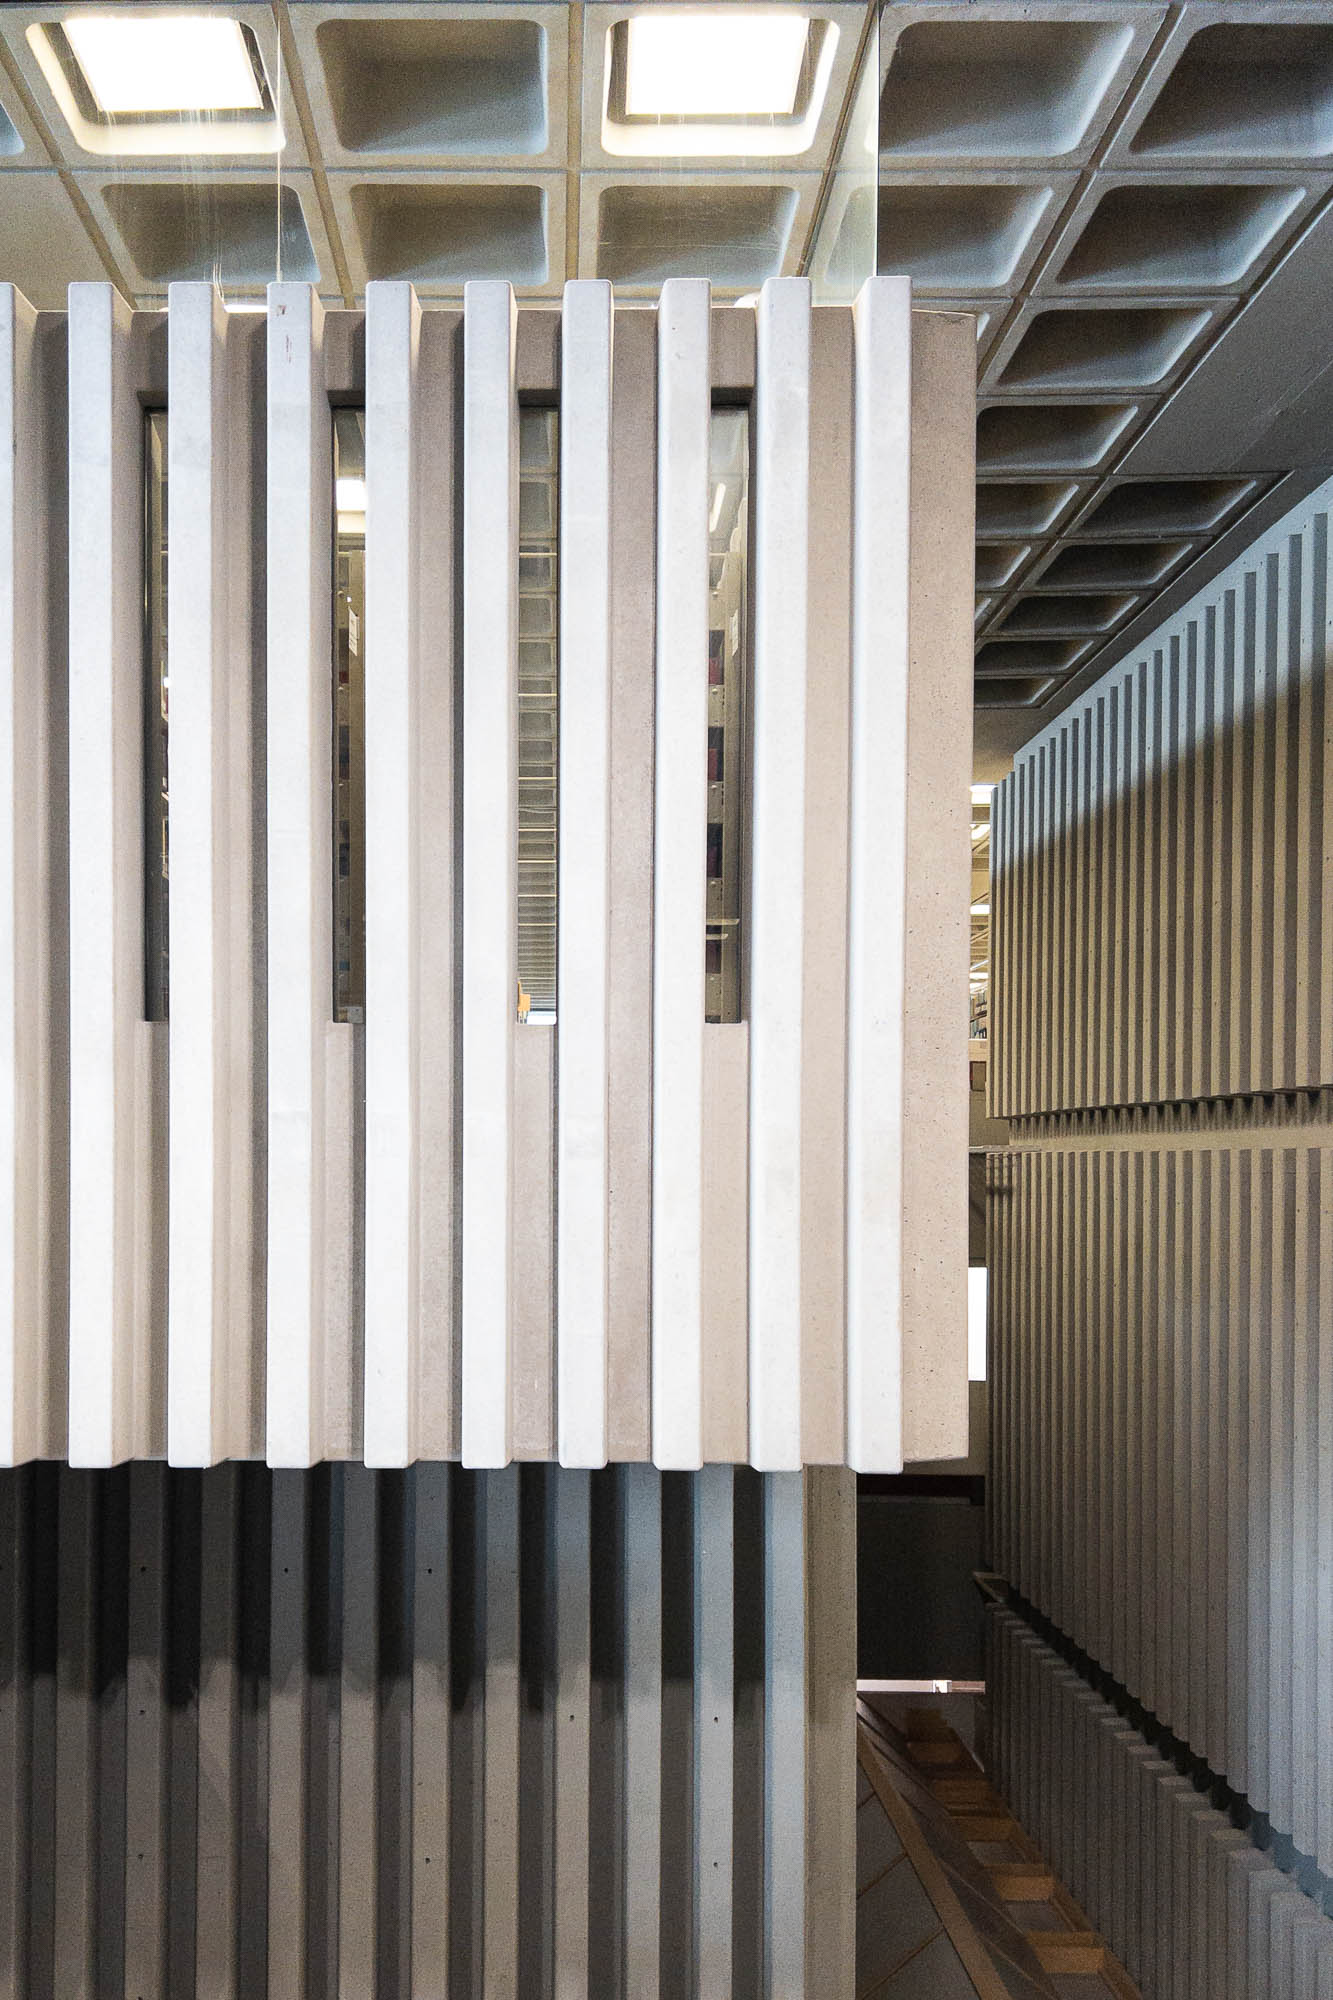 Interior of a brutalist library with interior walls detailed in thin vertical concrete fins.